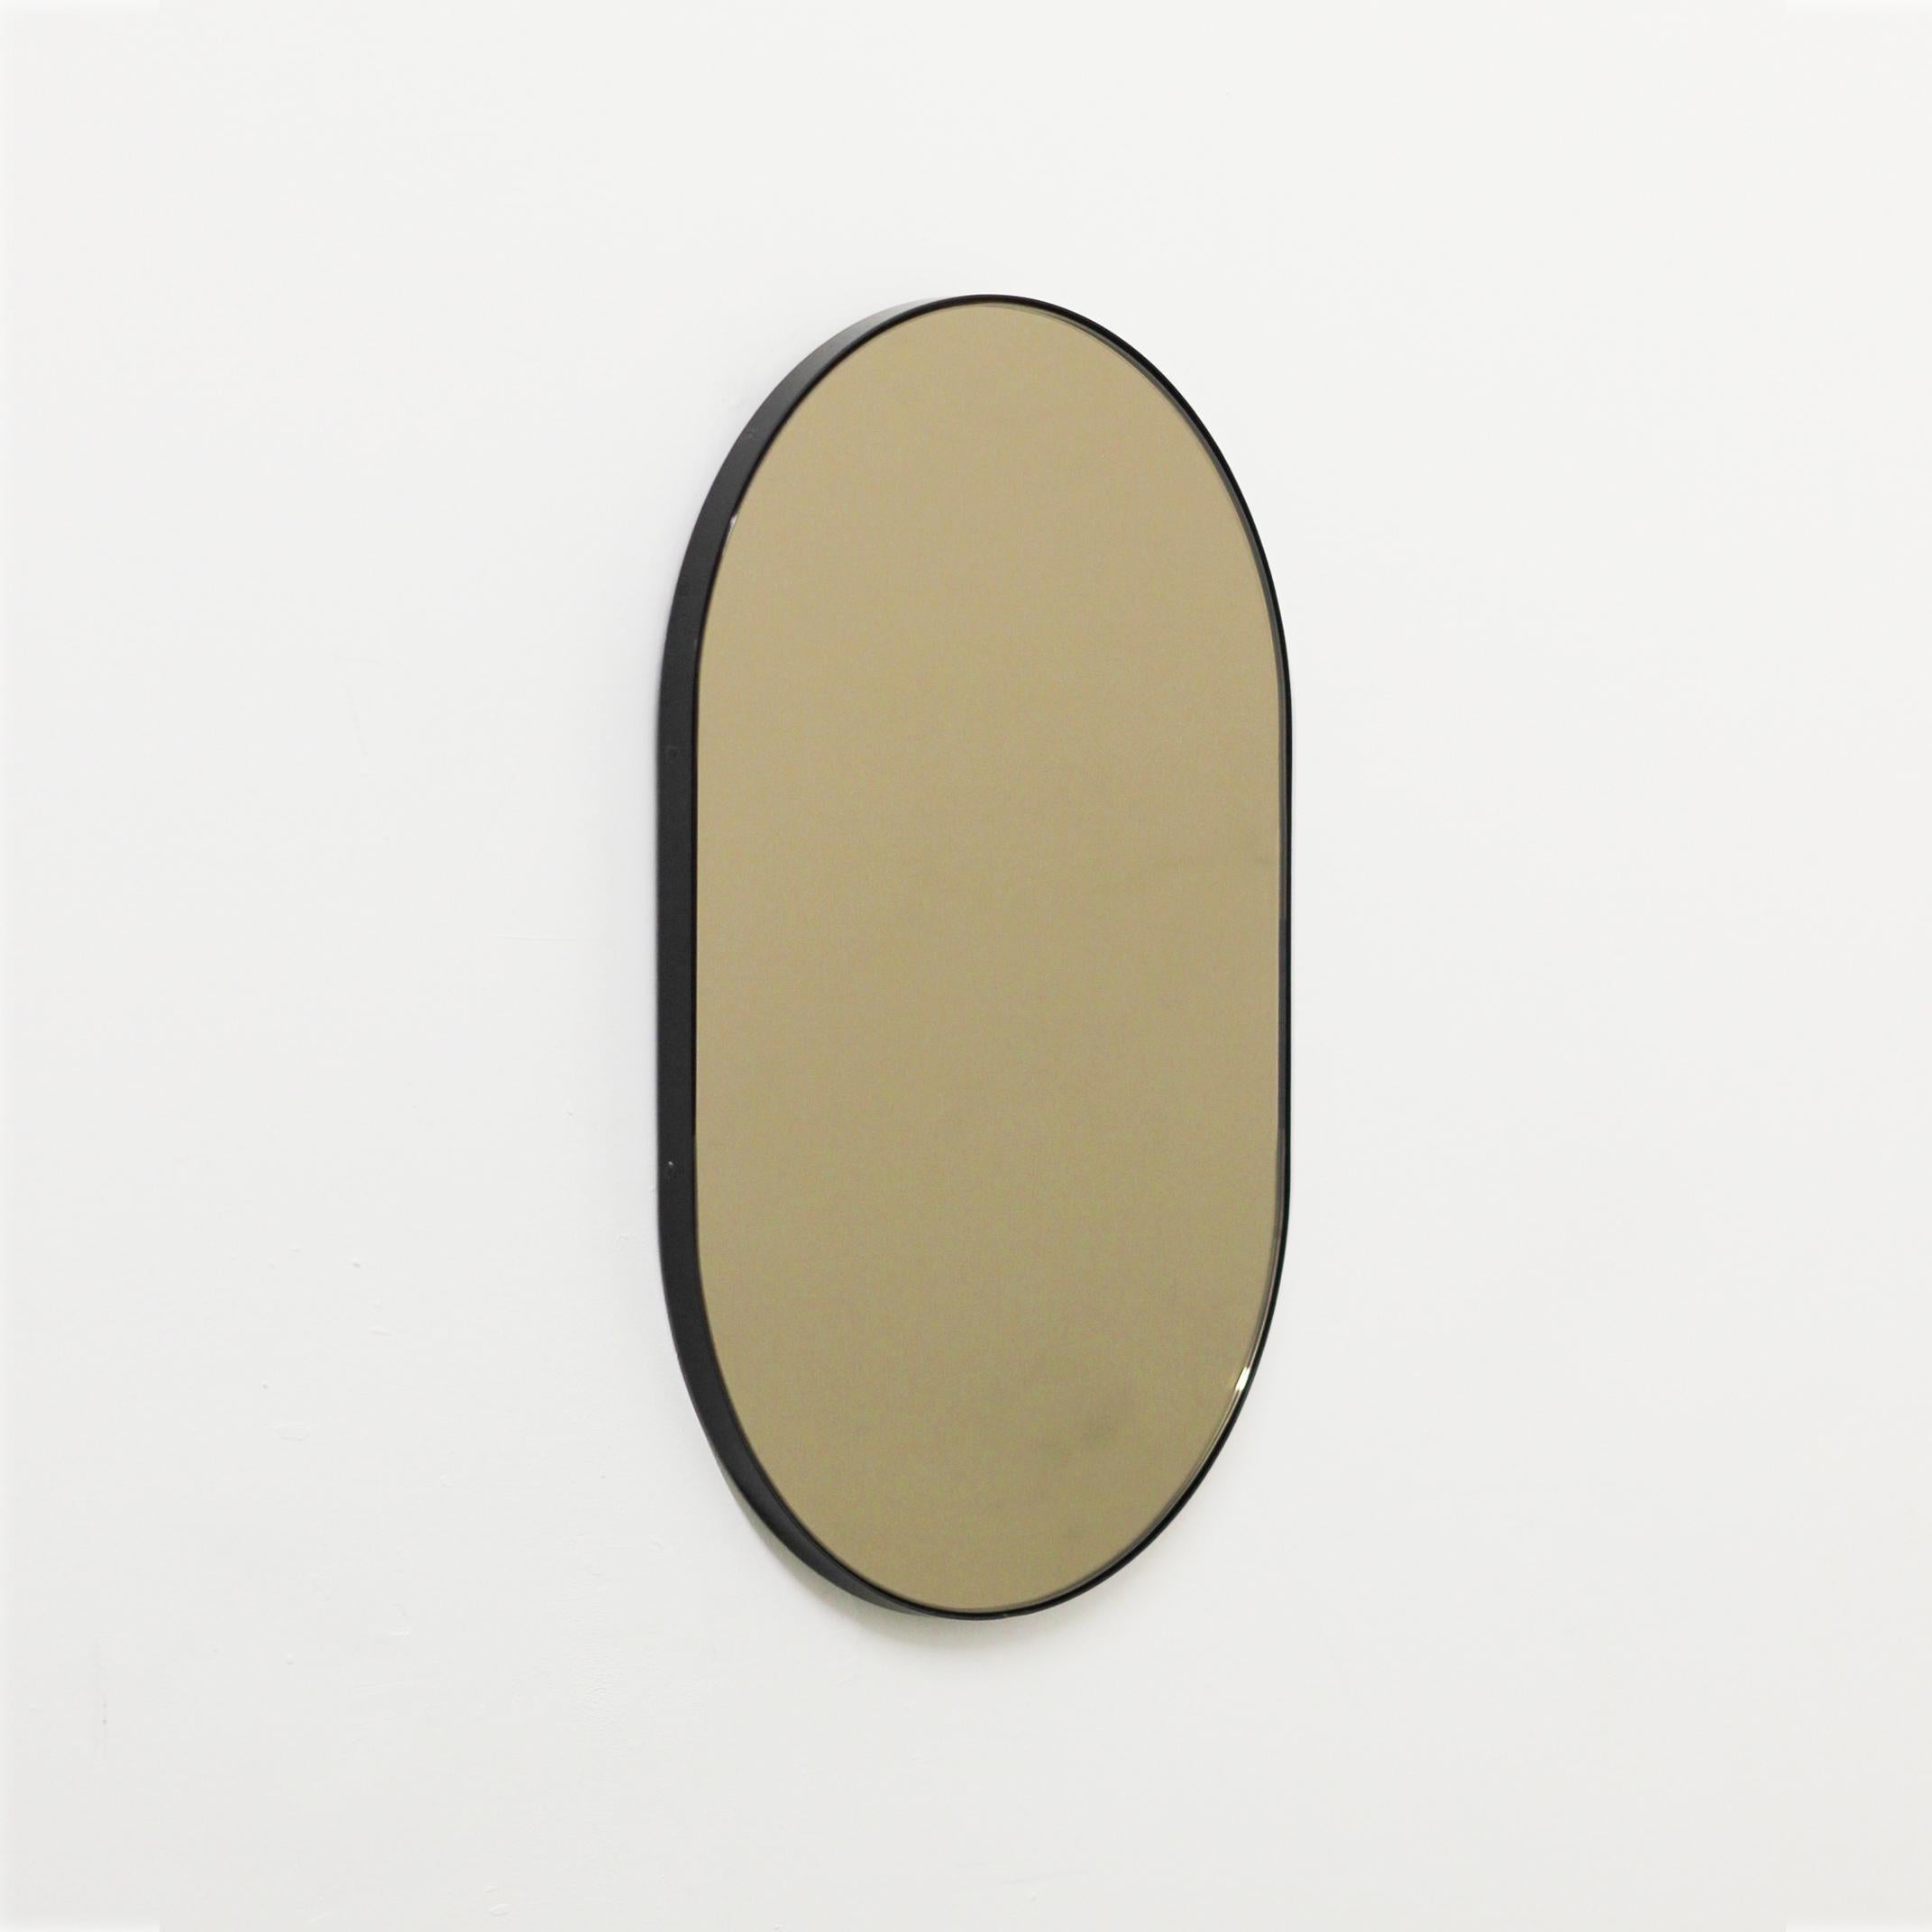 Modern handcrafted capsule shaped bronze tinted mirror with an elegant black powder coated aluminium frame. Designed and handcrafted in London, UK.

Fitted with a brass hook or an aluminium z-bar depending on the size of the mirror. Also available